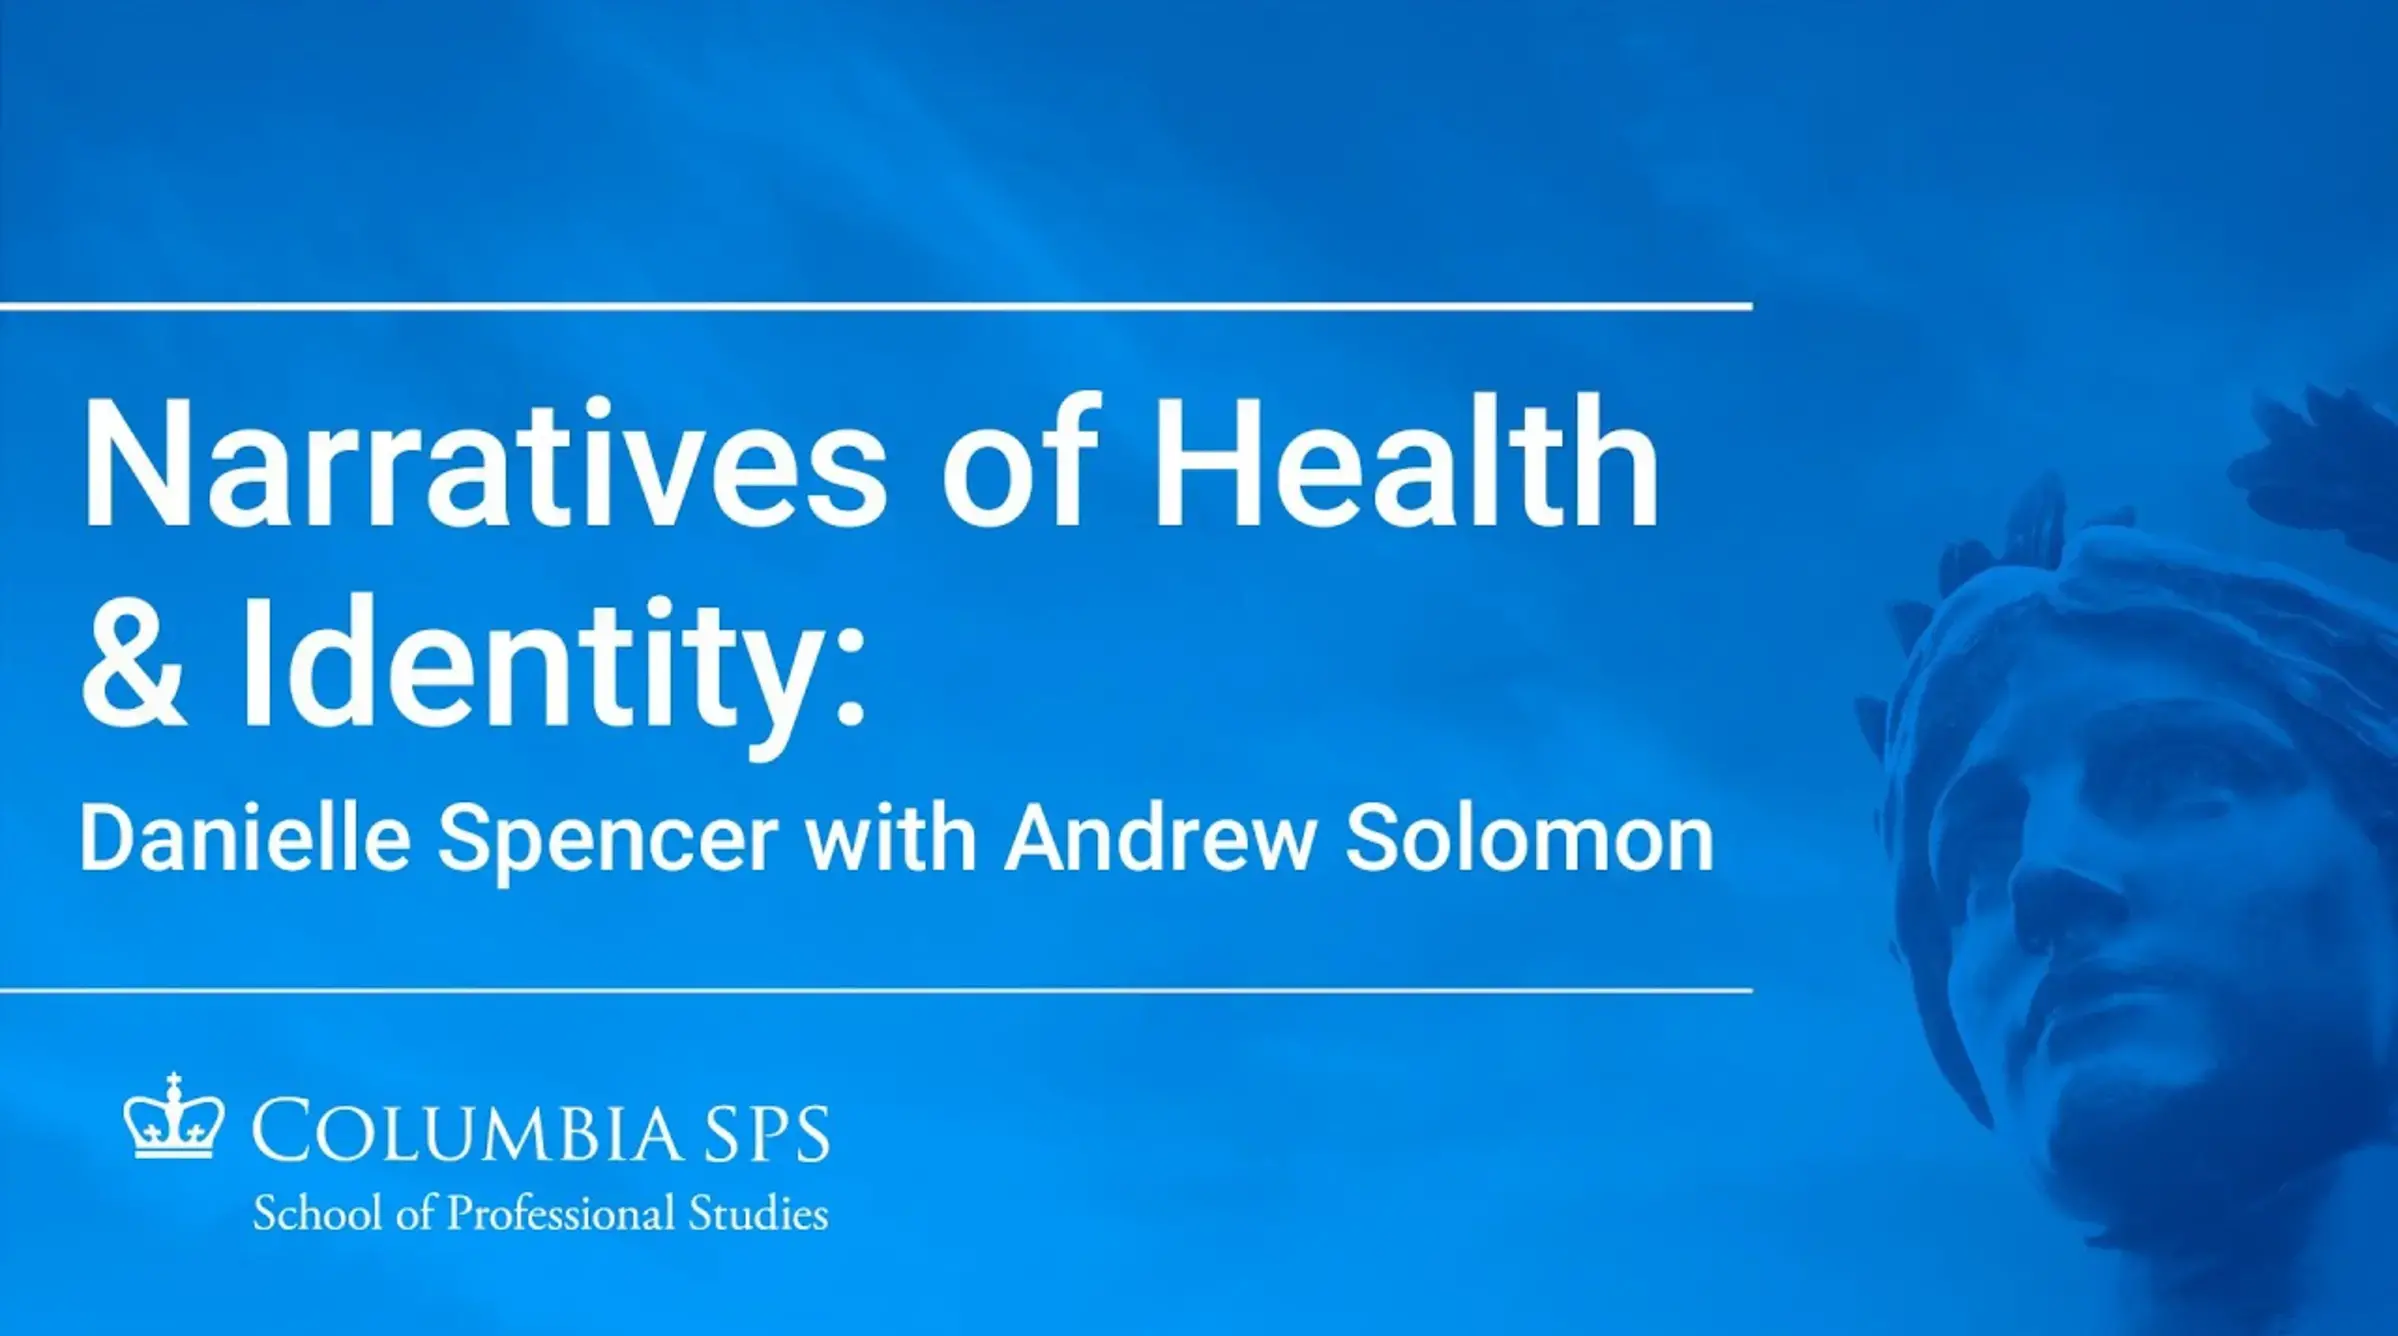 Narratives of Health and Identity: Danielle Spencer with Andrew Solomon